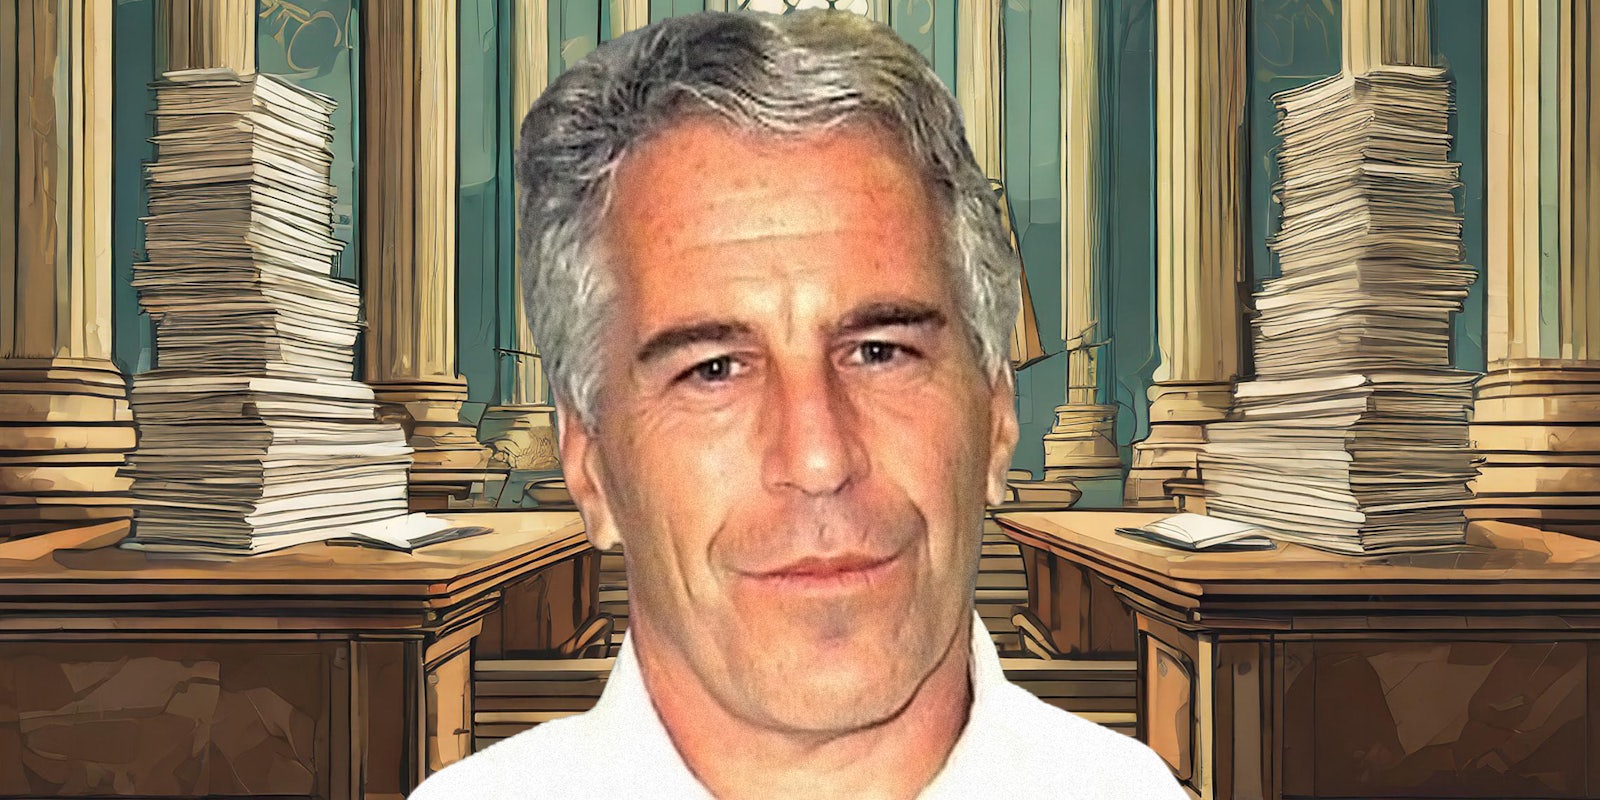 Jeffrey Epstein in front of papers on table illustration